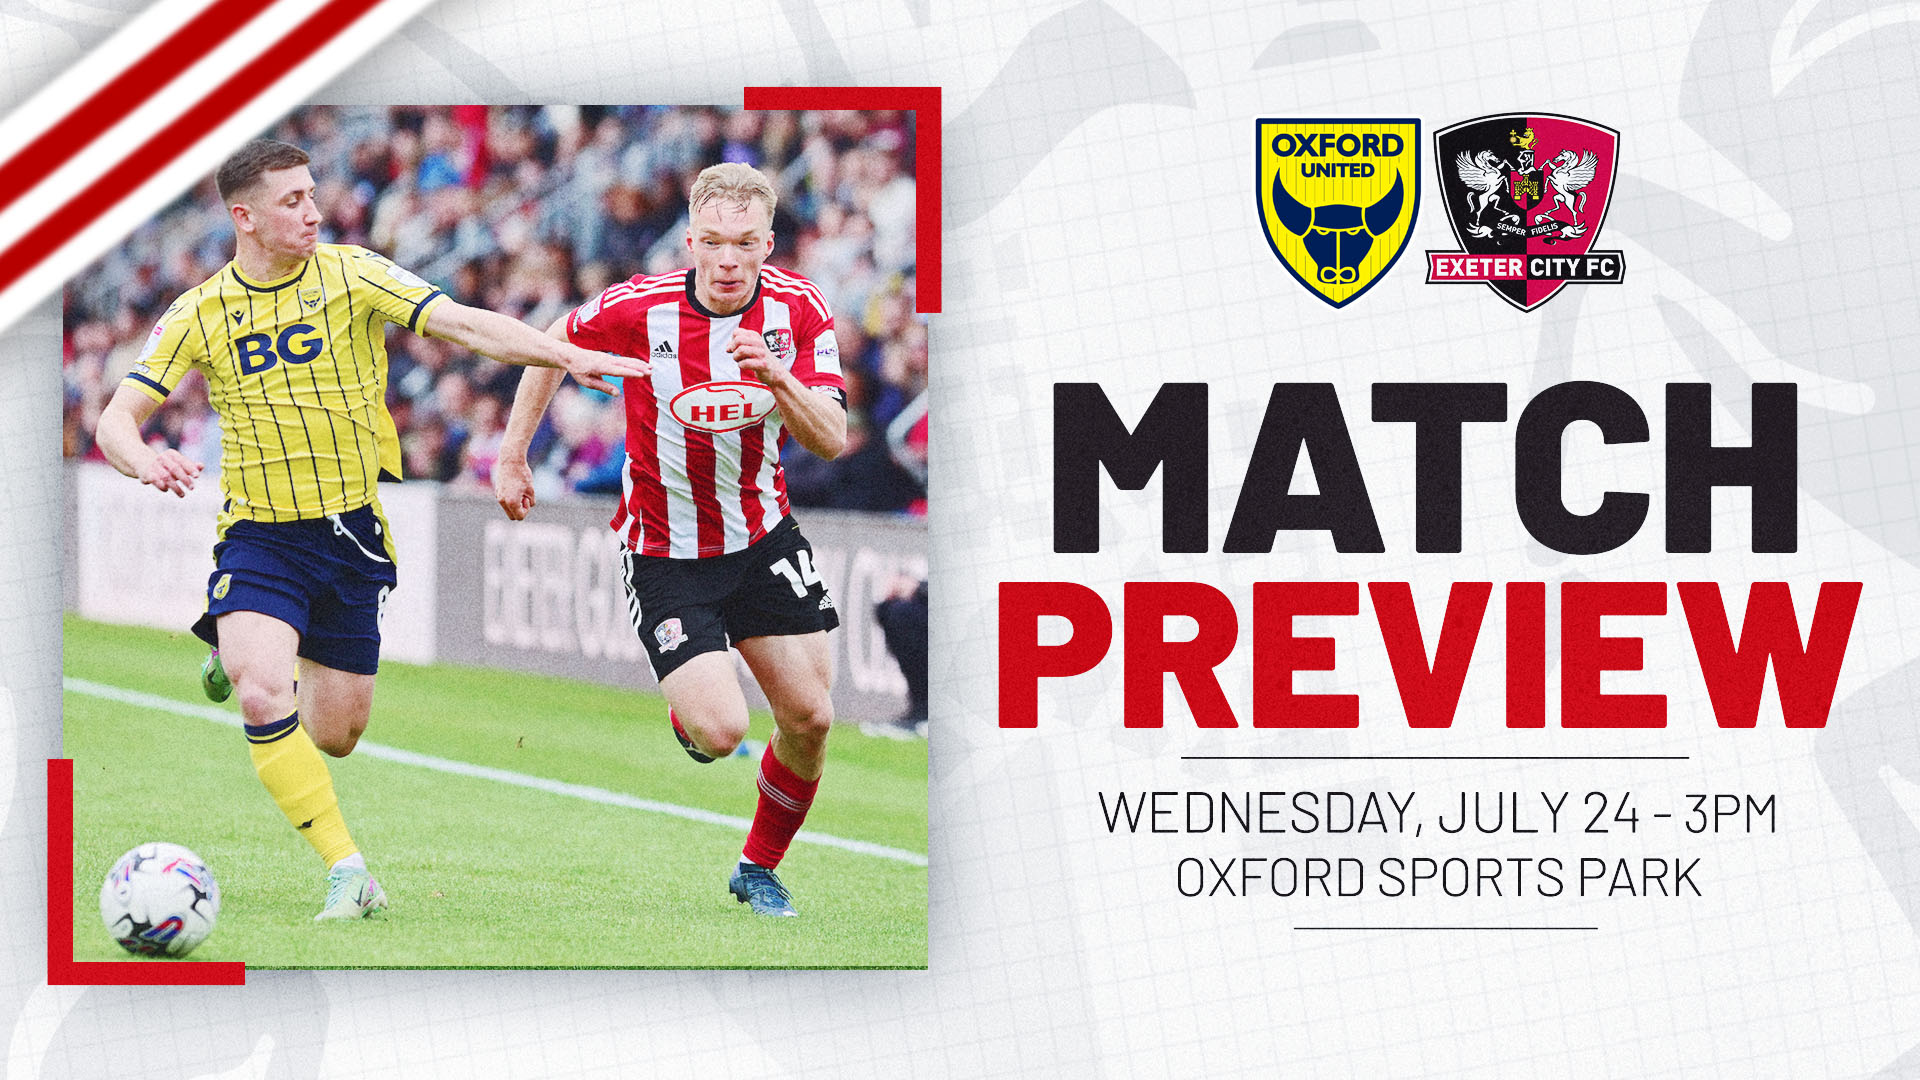 Match Preview image for Oxford United